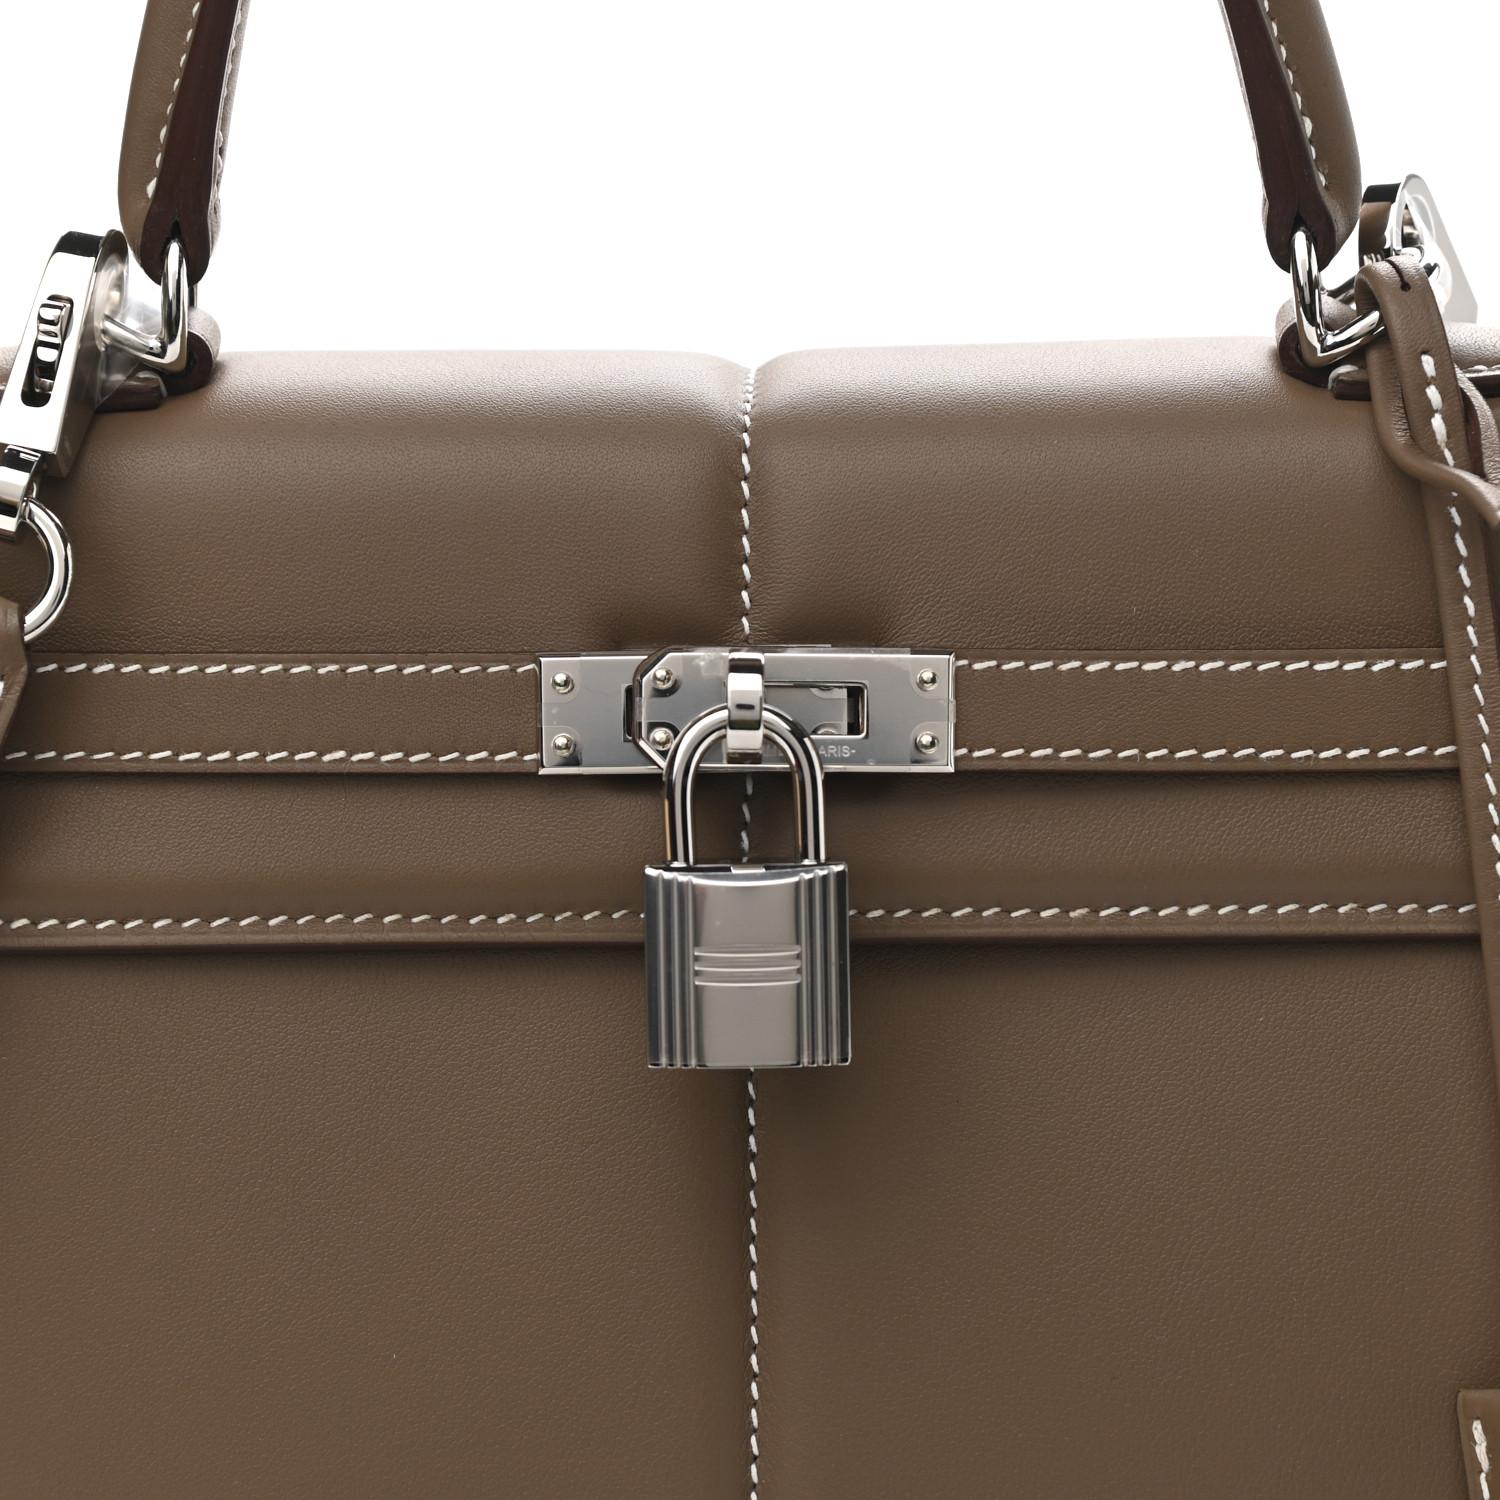 New Condition 
From 2021 Collection
Etoupe Swift Calfskin Leather
Palladium Hardware
Measures 9.75